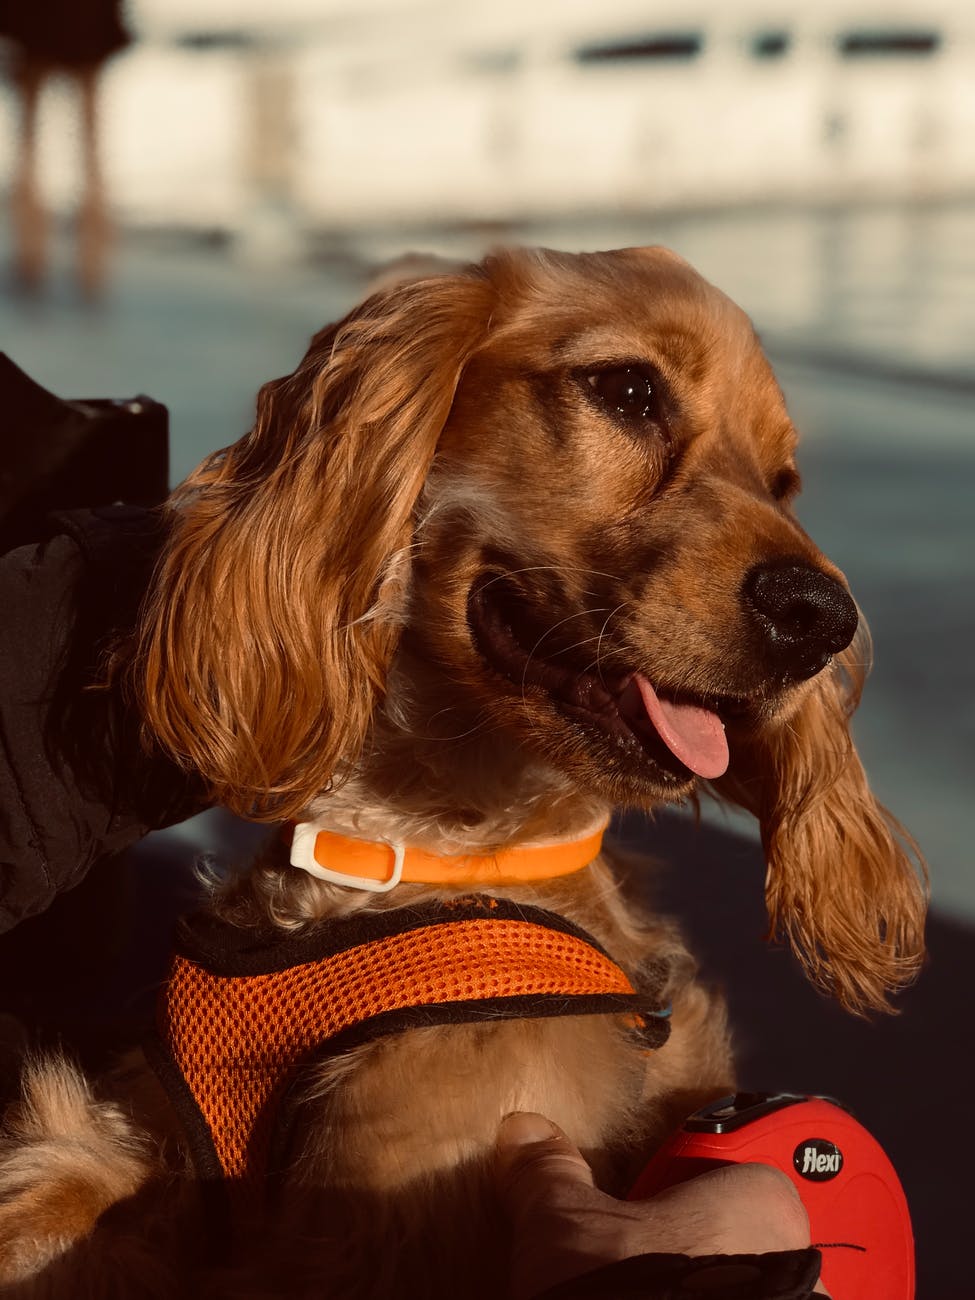 close up of Cocker Spaniel in orange harness being held by owner